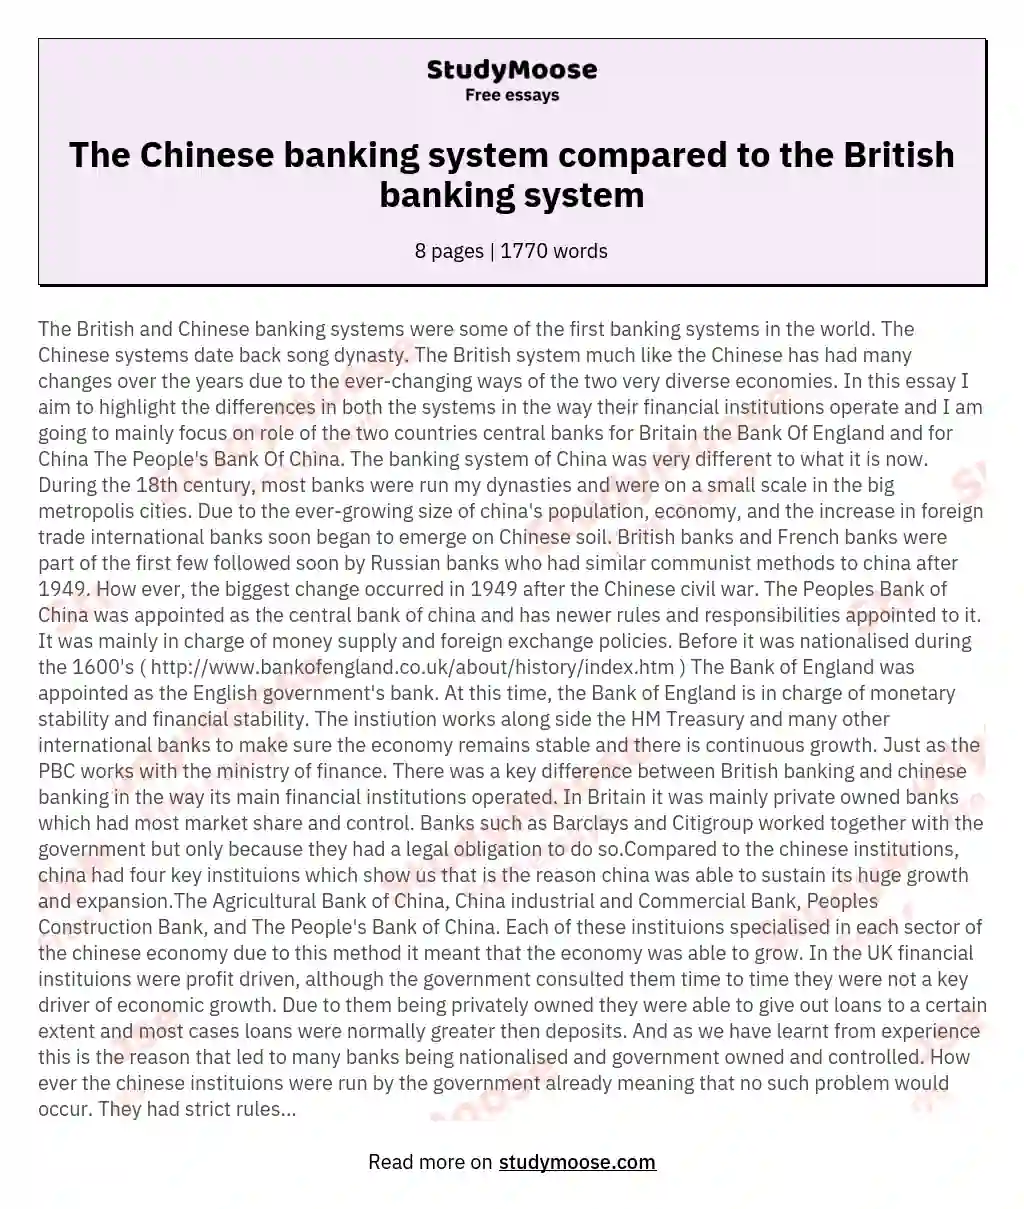 The Chinese banking system compared to the British banking system